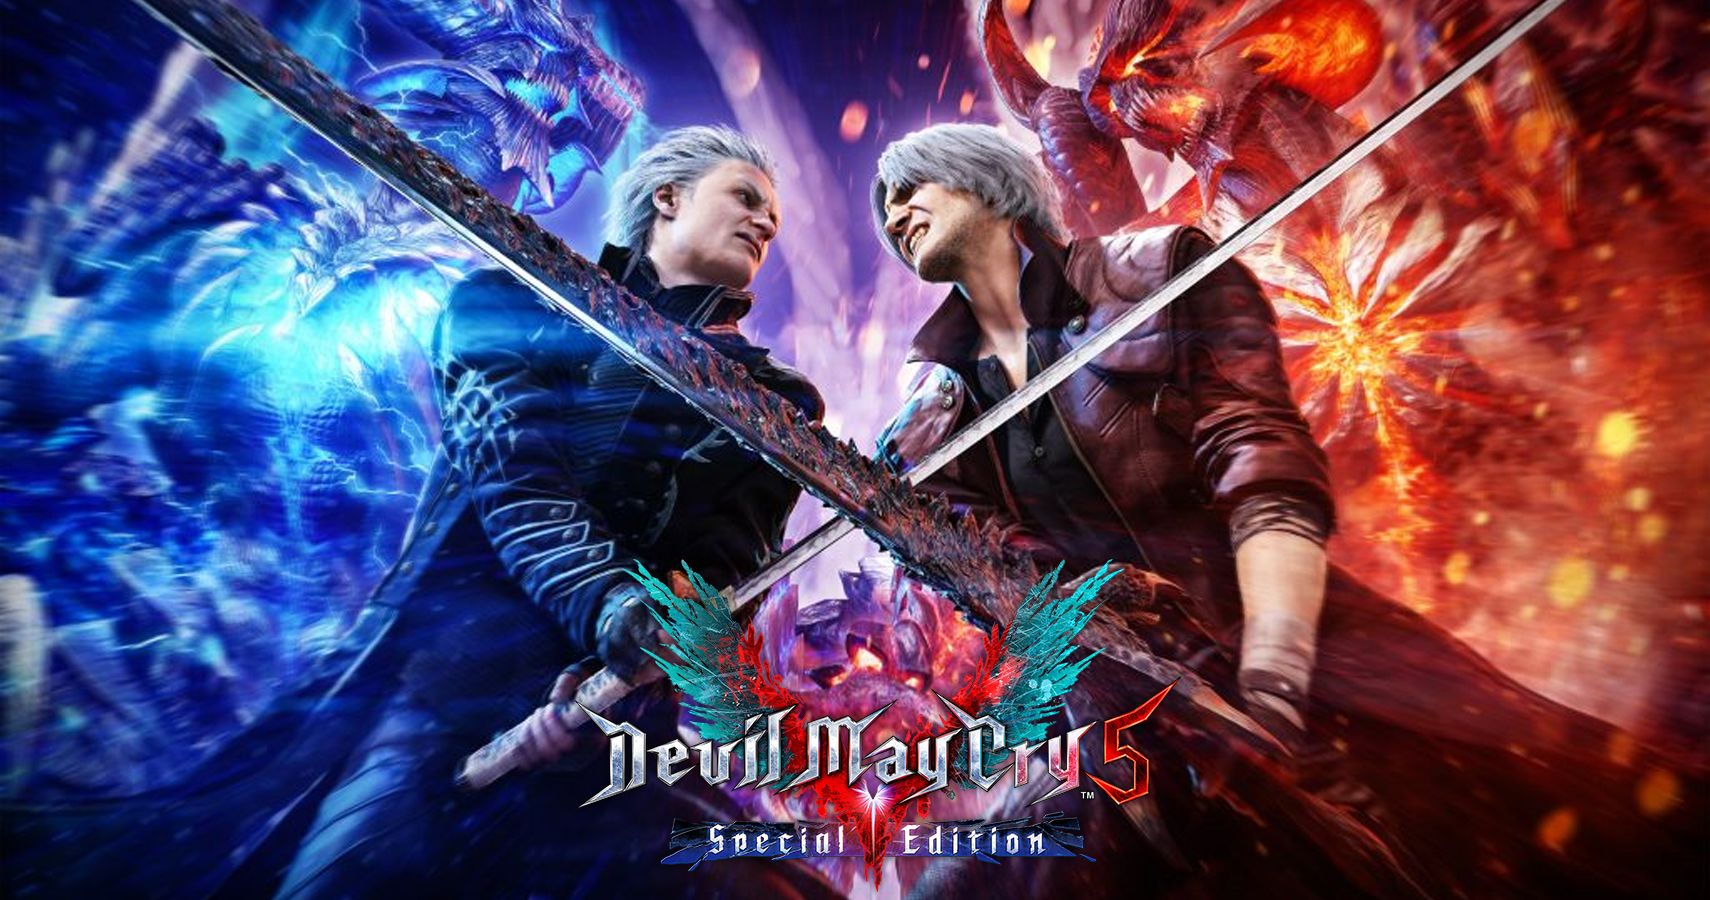 Devil May Cry 5 Vergil DLC Will Be Available December 15, 2020